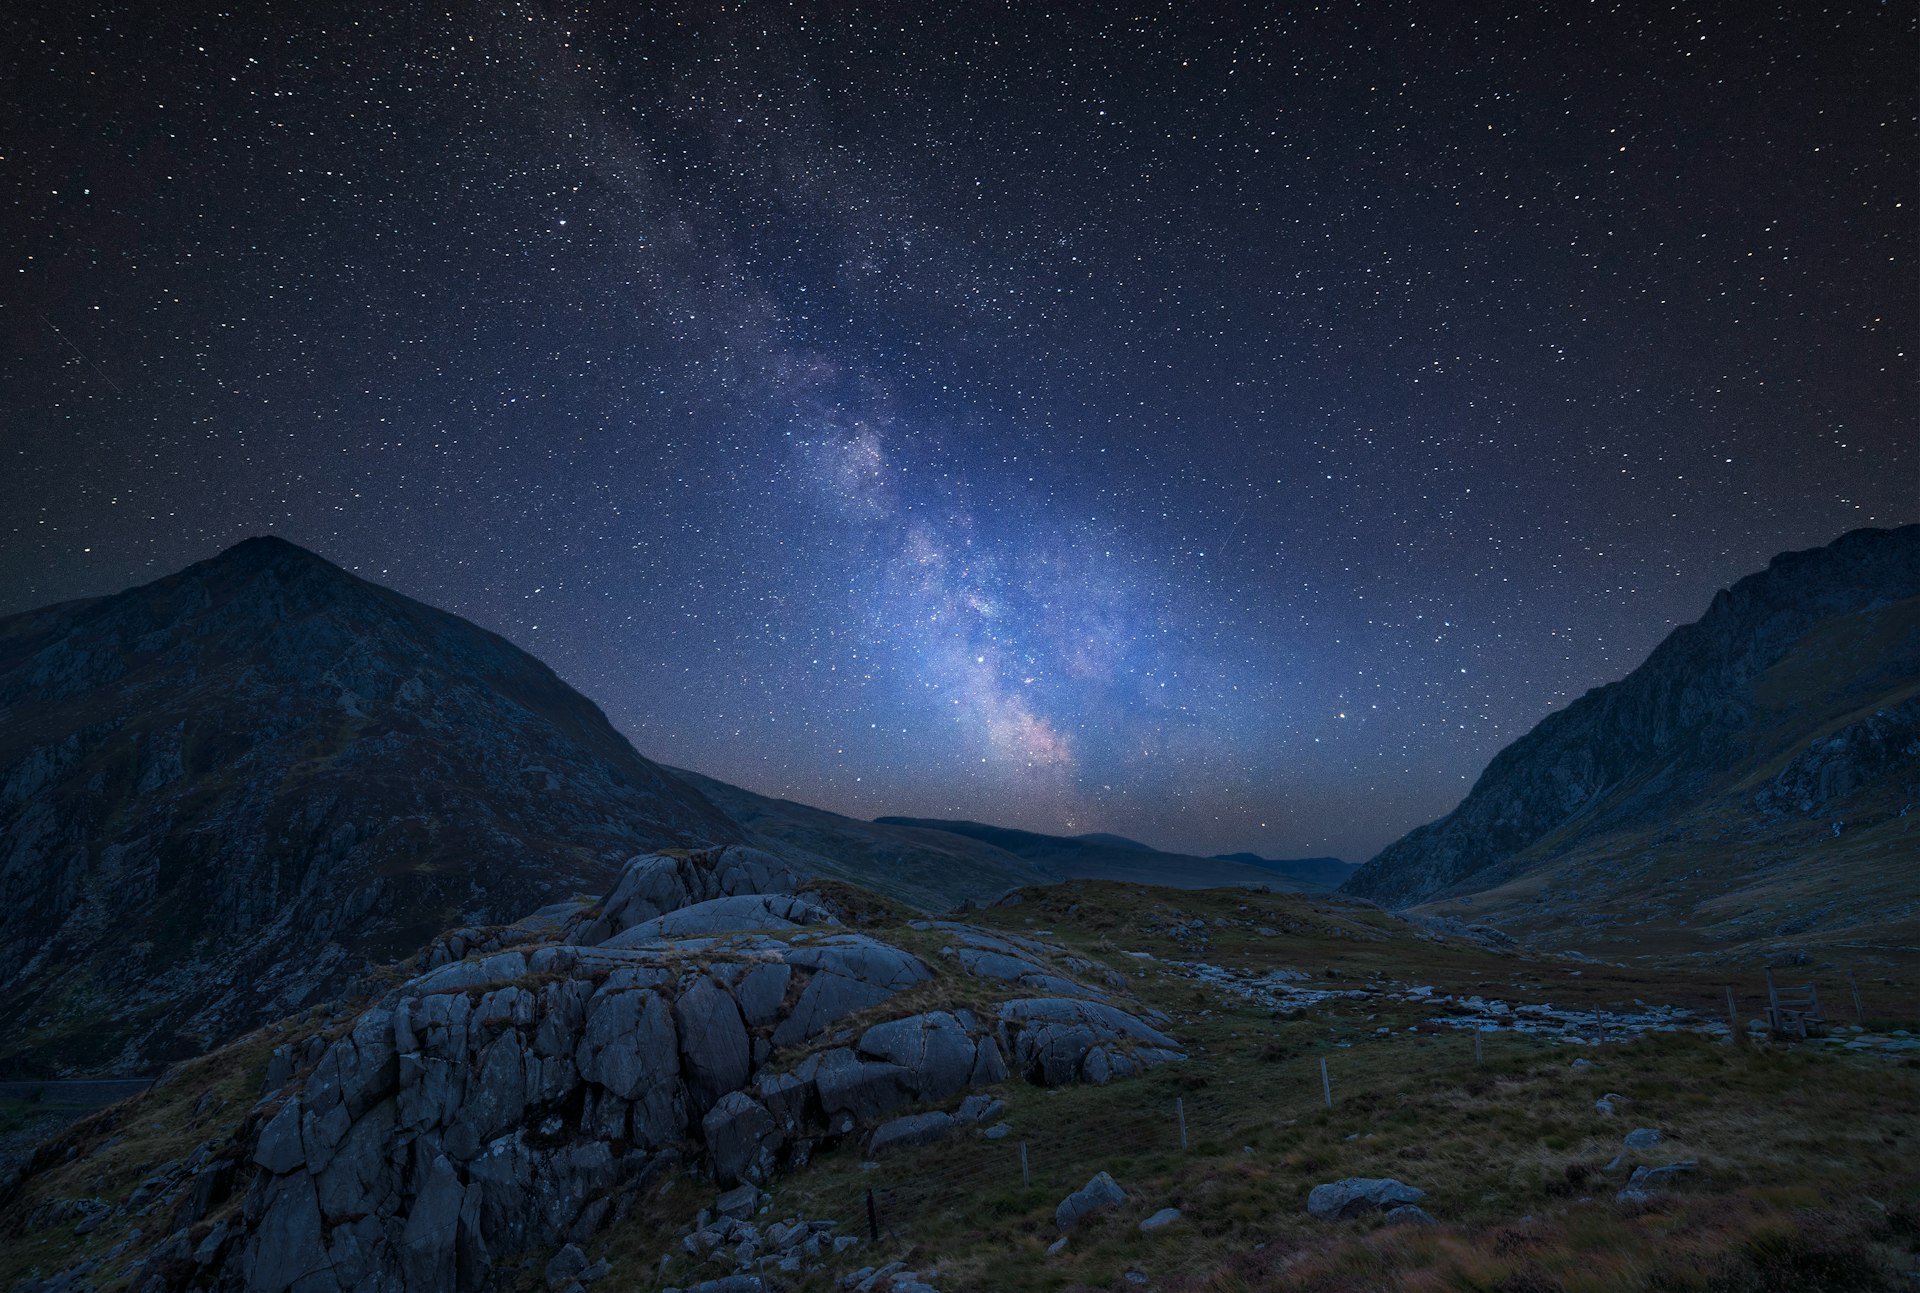 Stunning vibrant Milky Way composite image over Beautiful moody landscape image of a valley in Wales